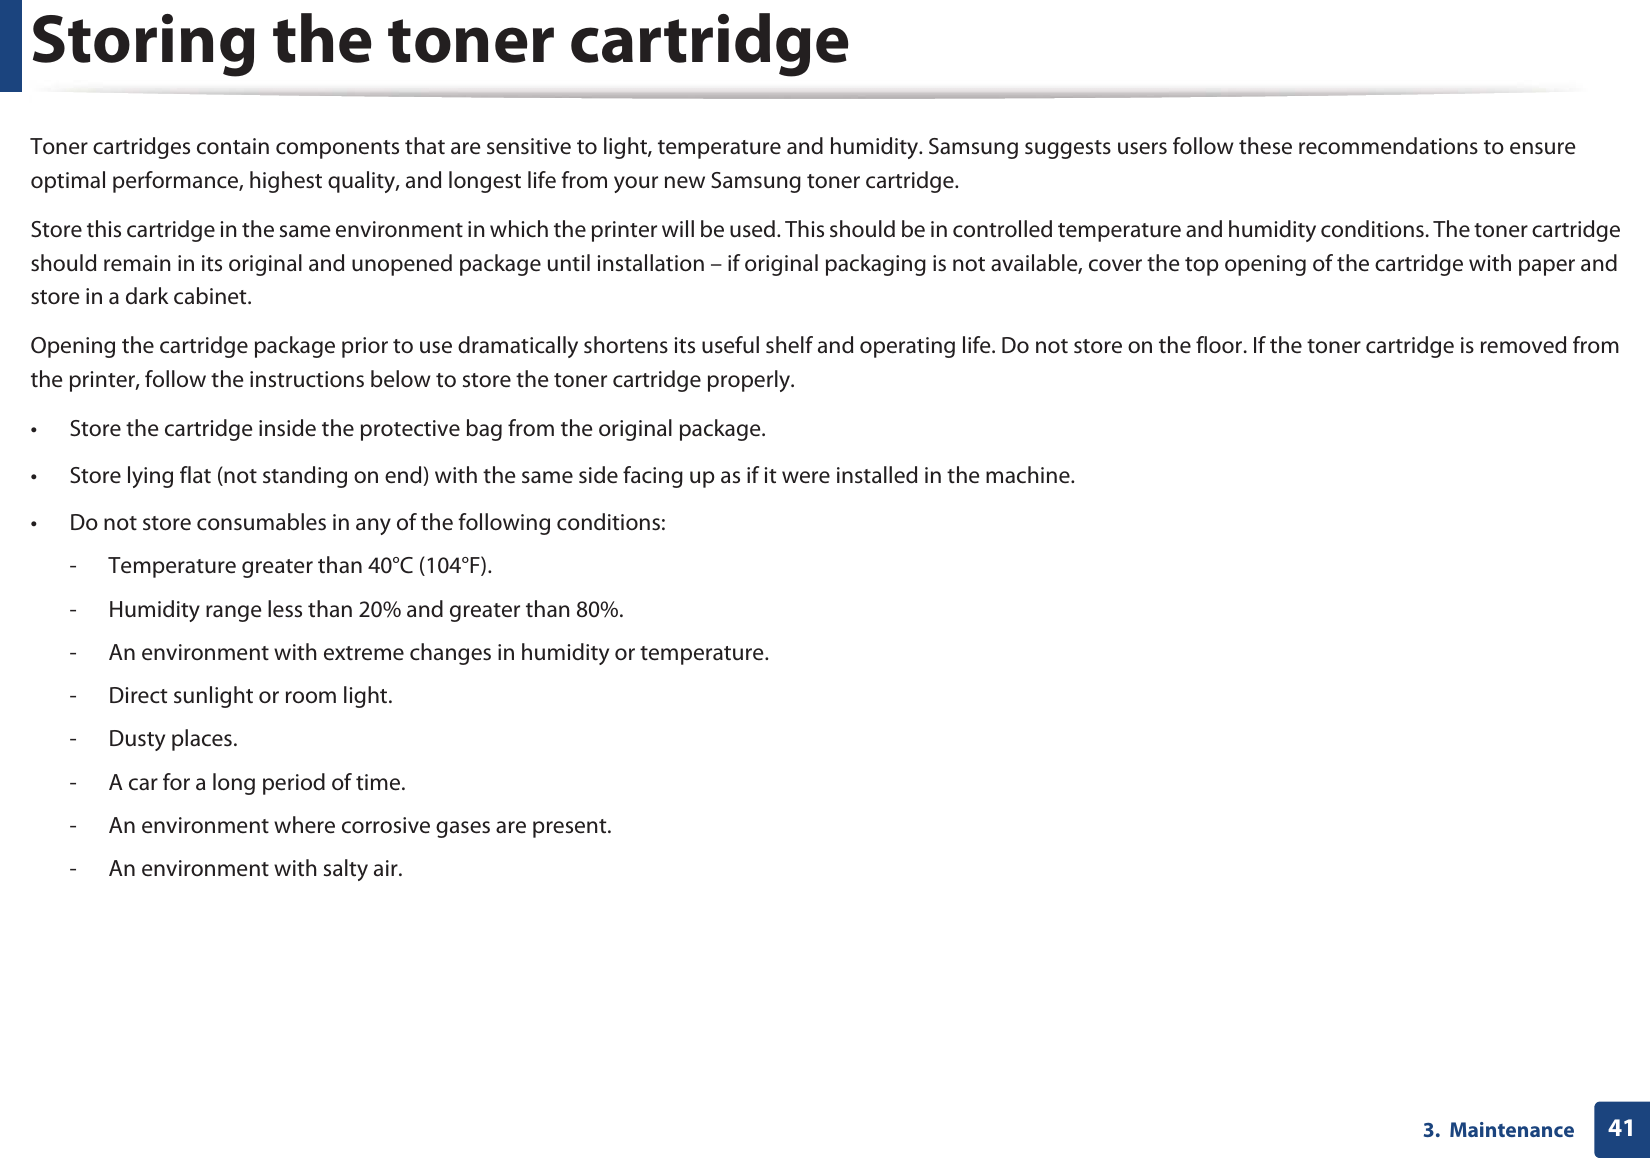 413.  MaintenanceStoring the toner cartridgeToner cartridges contain components that are sensitive to light, temperature and humidity. Samsung suggests users follow these recommendations to ensure optimal performance, highest quality, and longest life from your new Samsung toner cartridge.Store this cartridge in the same environment in which the printer will be used. This should be in controlled temperature and humidity conditions. The toner cartridge should remain in its original and unopened package until installation – if original packaging is not available, cover the top opening of the cartridge with paper and store in a dark cabinet.Opening the cartridge package prior to use dramatically shortens its useful shelf and operating life. Do not store on the floor. If the toner cartridge is removed from the printer, follow the instructions below to store the toner cartridge properly.• Store the cartridge inside the protective bag from the original package. • Store lying flat (not standing on end) with the same side facing up as if it were installed in the machine.• Do not store consumables in any of the following conditions:- Temperature greater than 40°C (104°F).- Humidity range less than 20% and greater than 80%.- An environment with extreme changes in humidity or temperature.- Direct sunlight or room light.- Dusty places.- A car for a long period of time.- An environment where corrosive gases are present.- An environment with salty air.